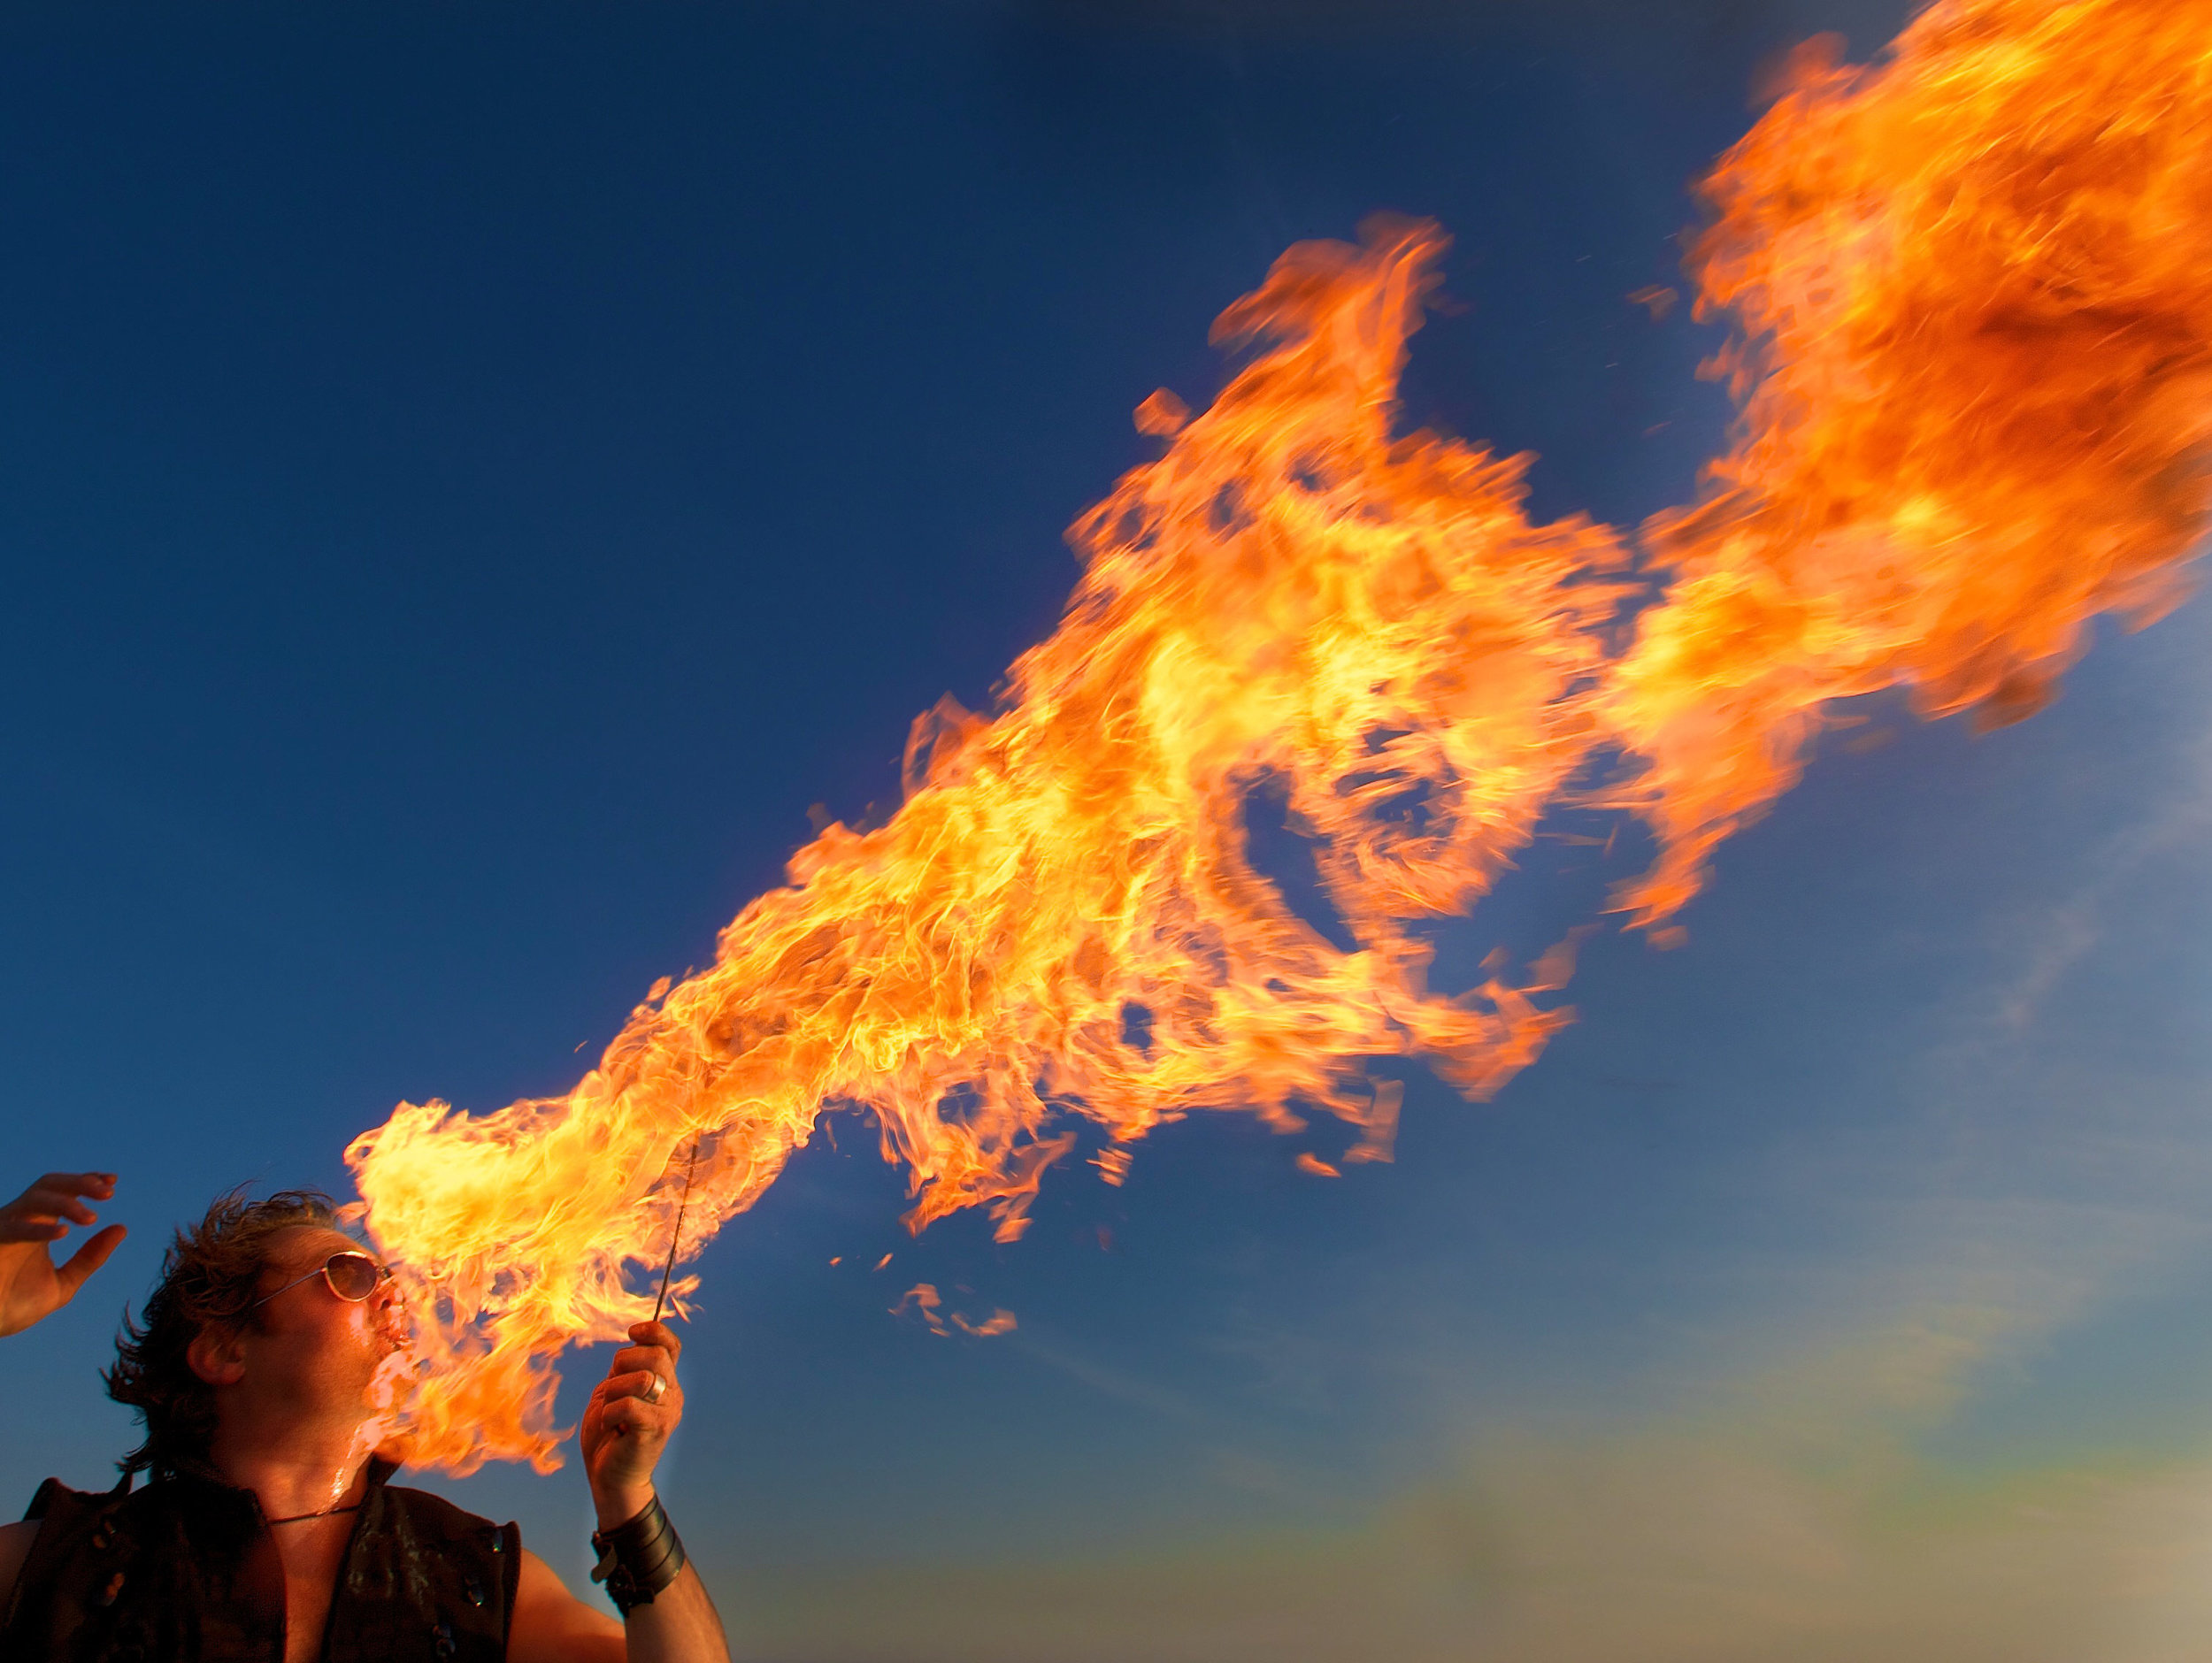 CHP_Export_10117852_Roy Maloy Fire eater (1).jpg